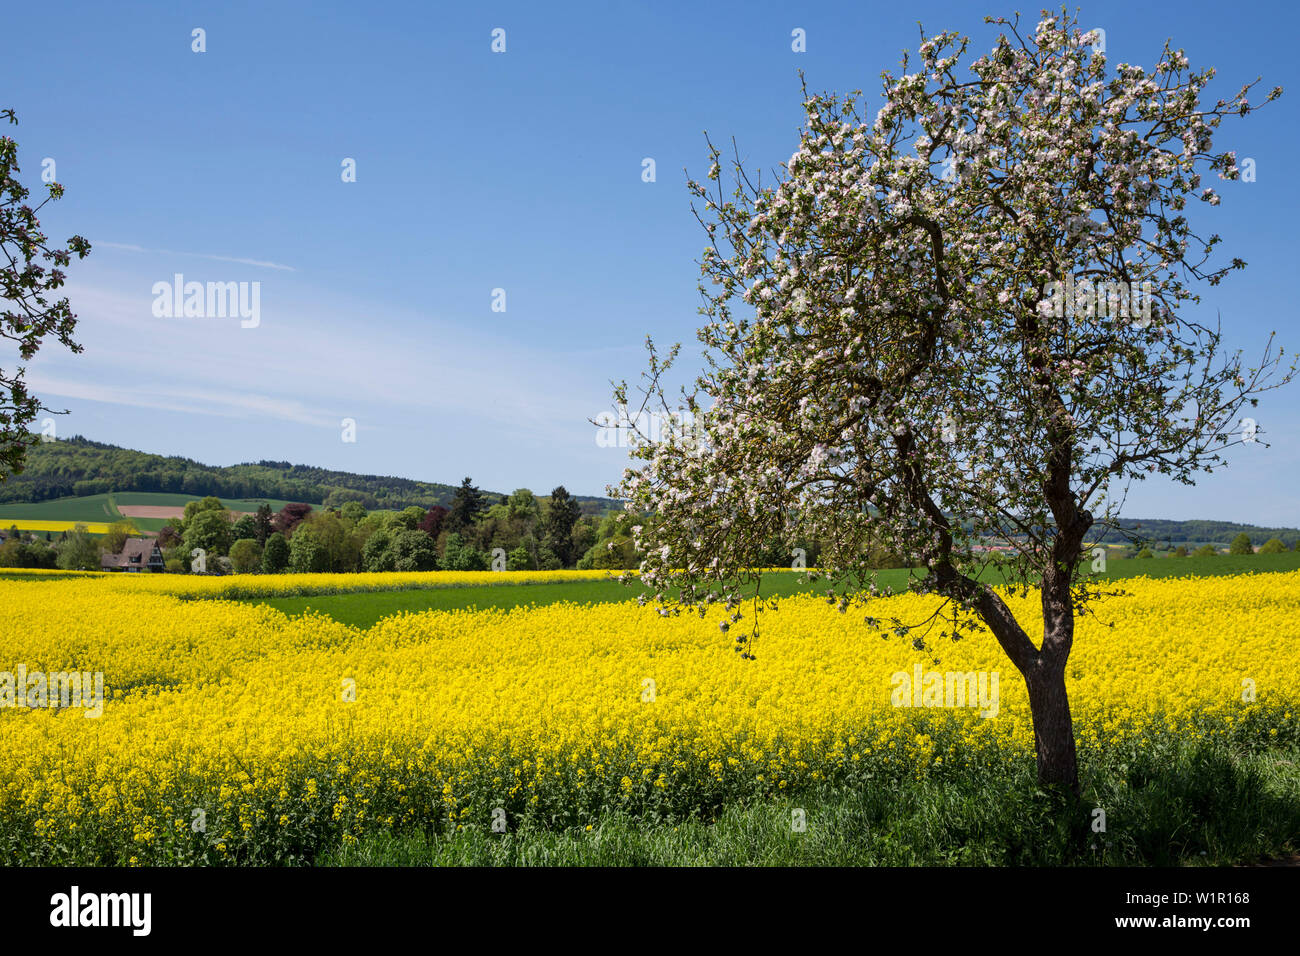 Blossoming apple tree in front of a yellow blooming canola field Zueschen, Fritzlar, Hesse, Germany, Europe Stock Photo